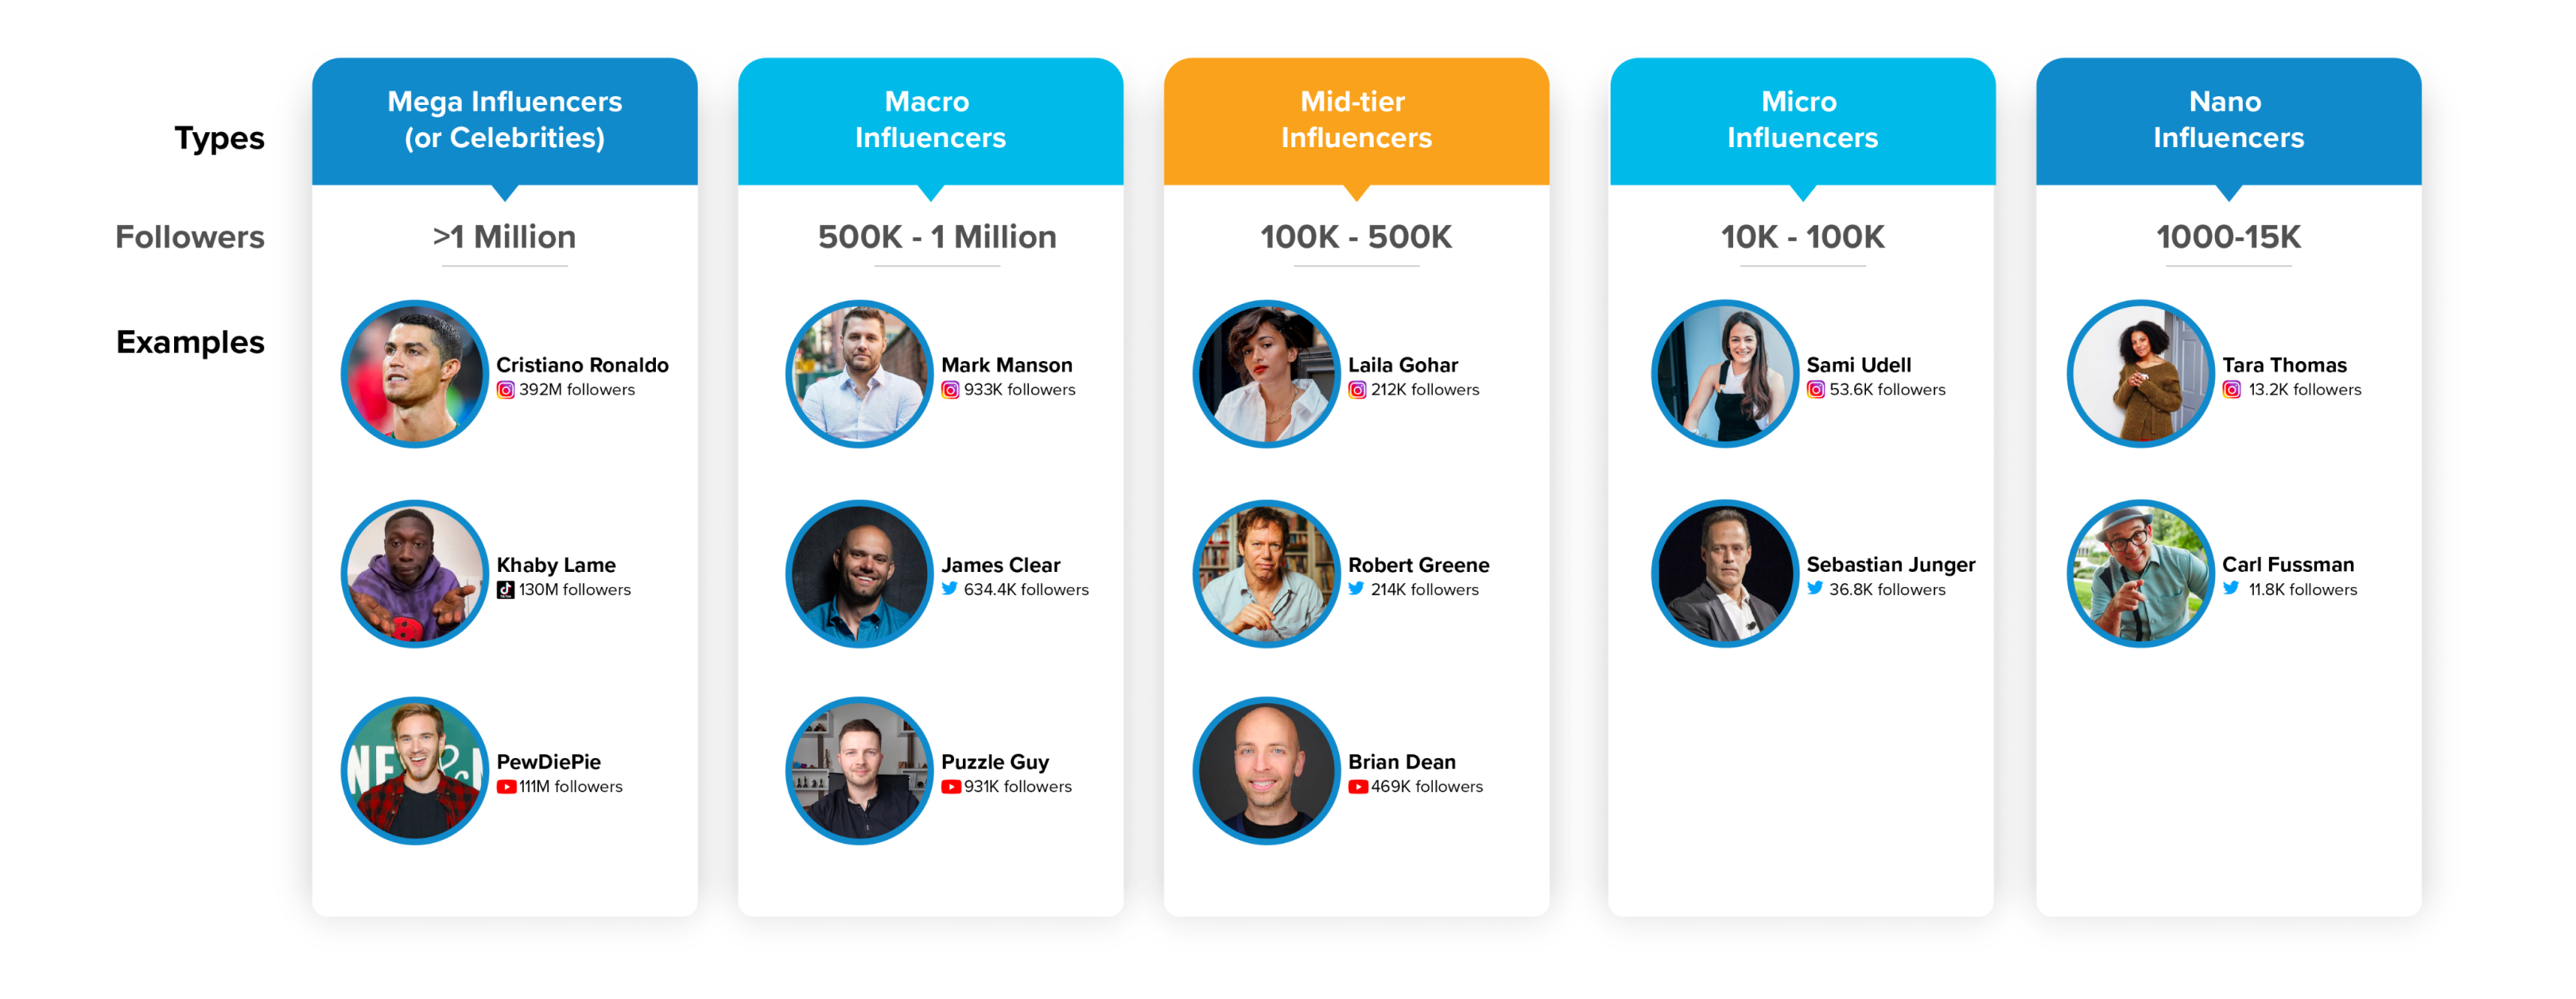 Classification of influencers according to the size of their following and examples of popular influencers under each category.